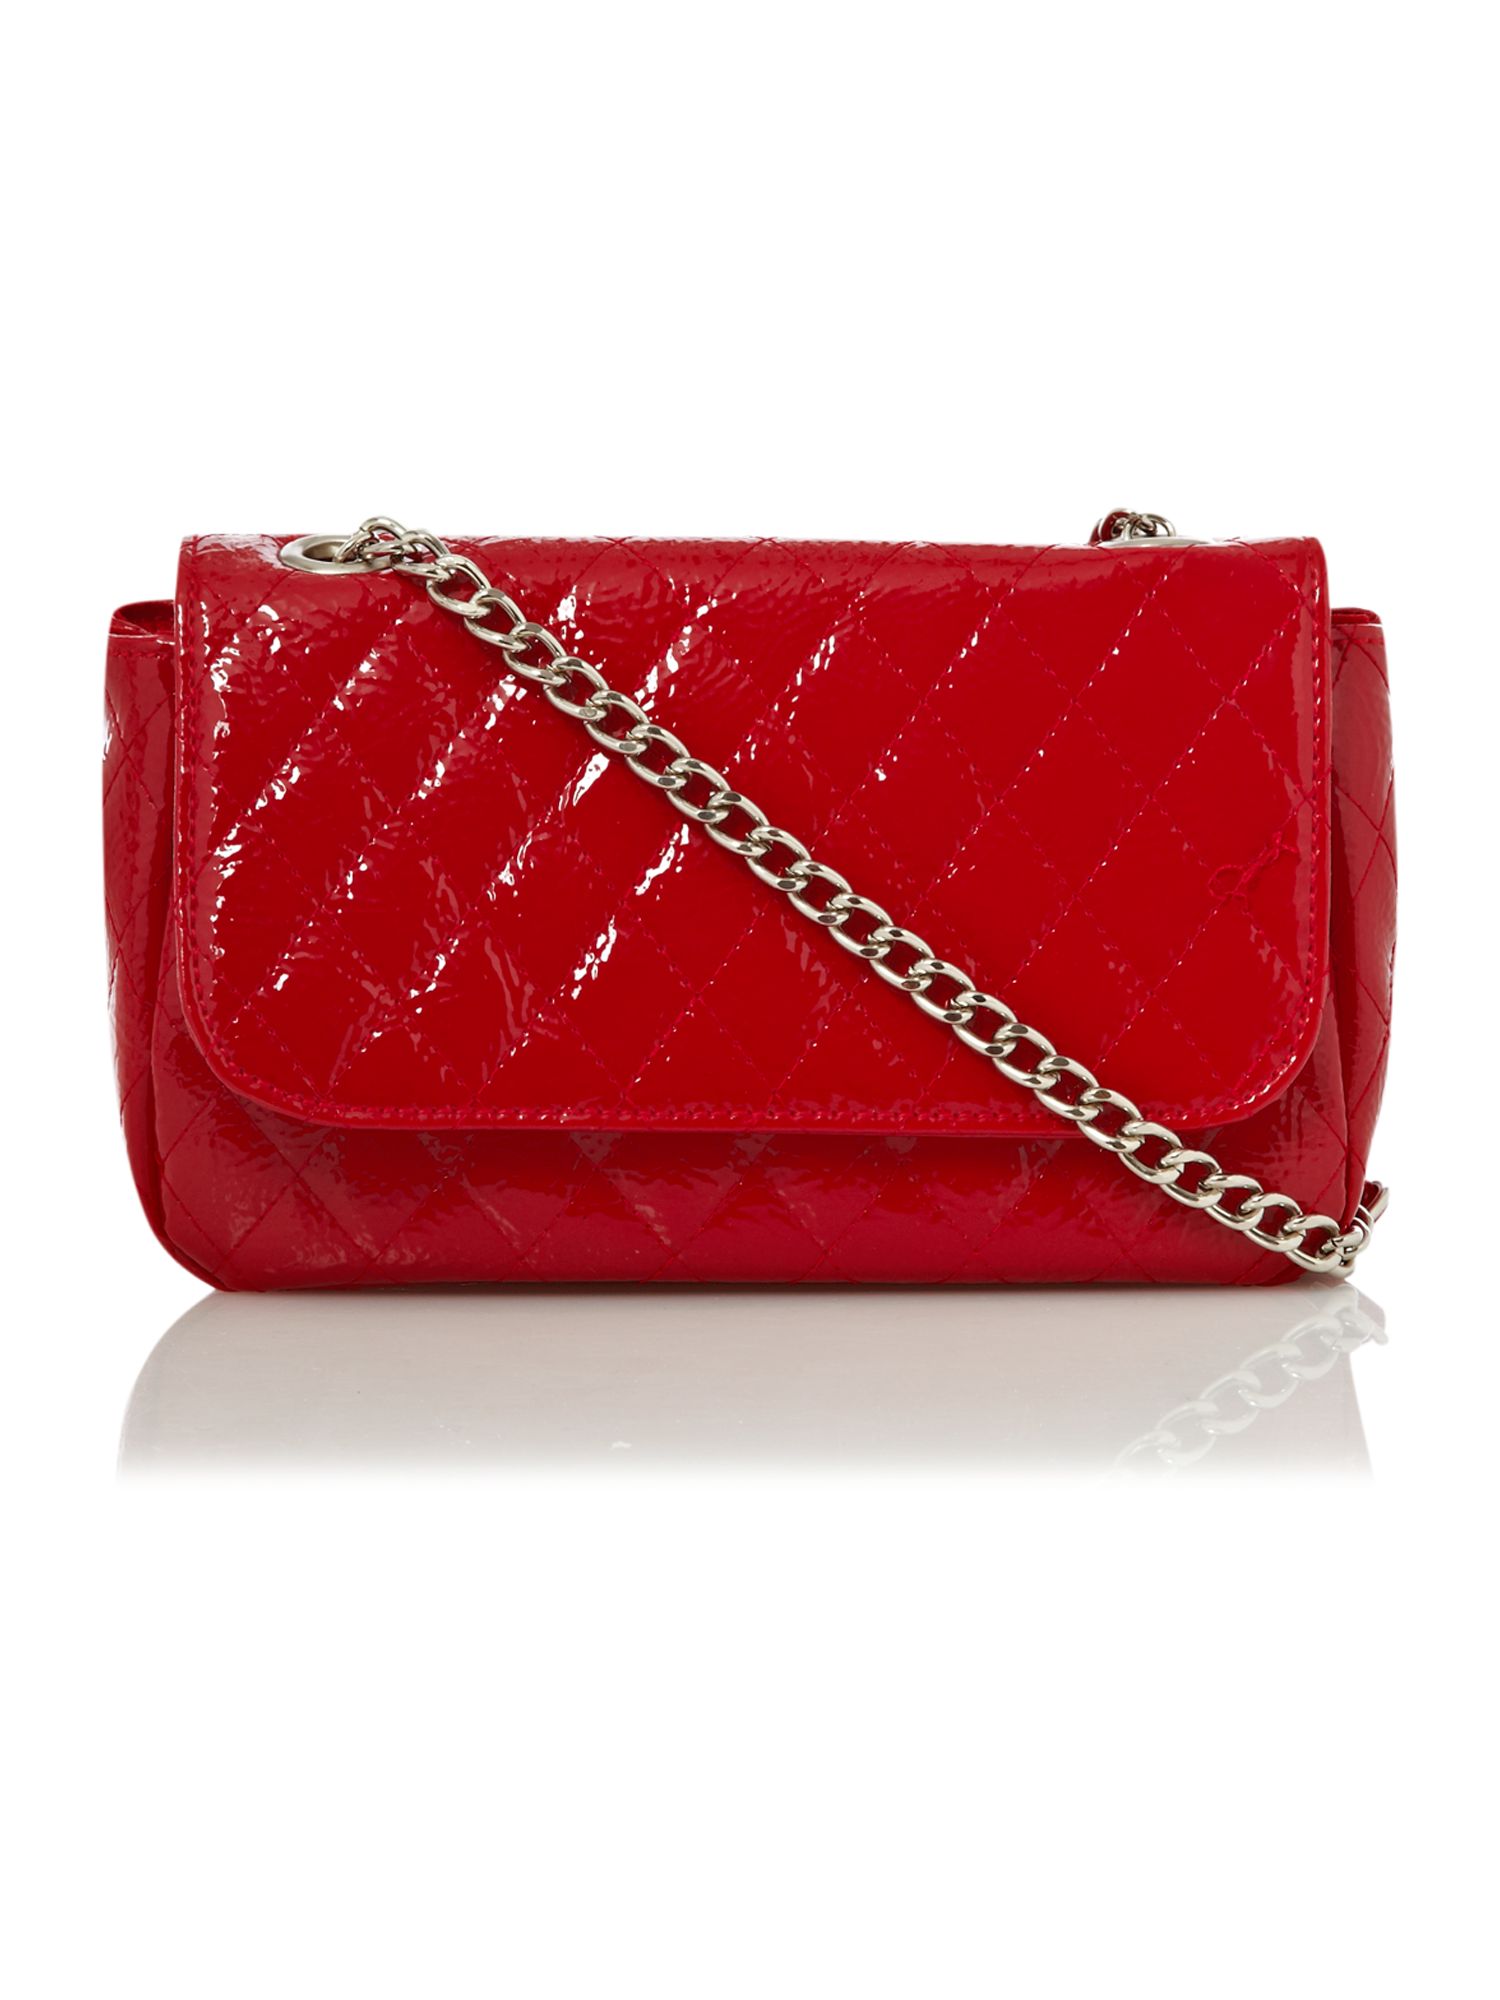 Kenneth Cole Reaction Quilted Chain Crossbody Bag in Red | Lyst